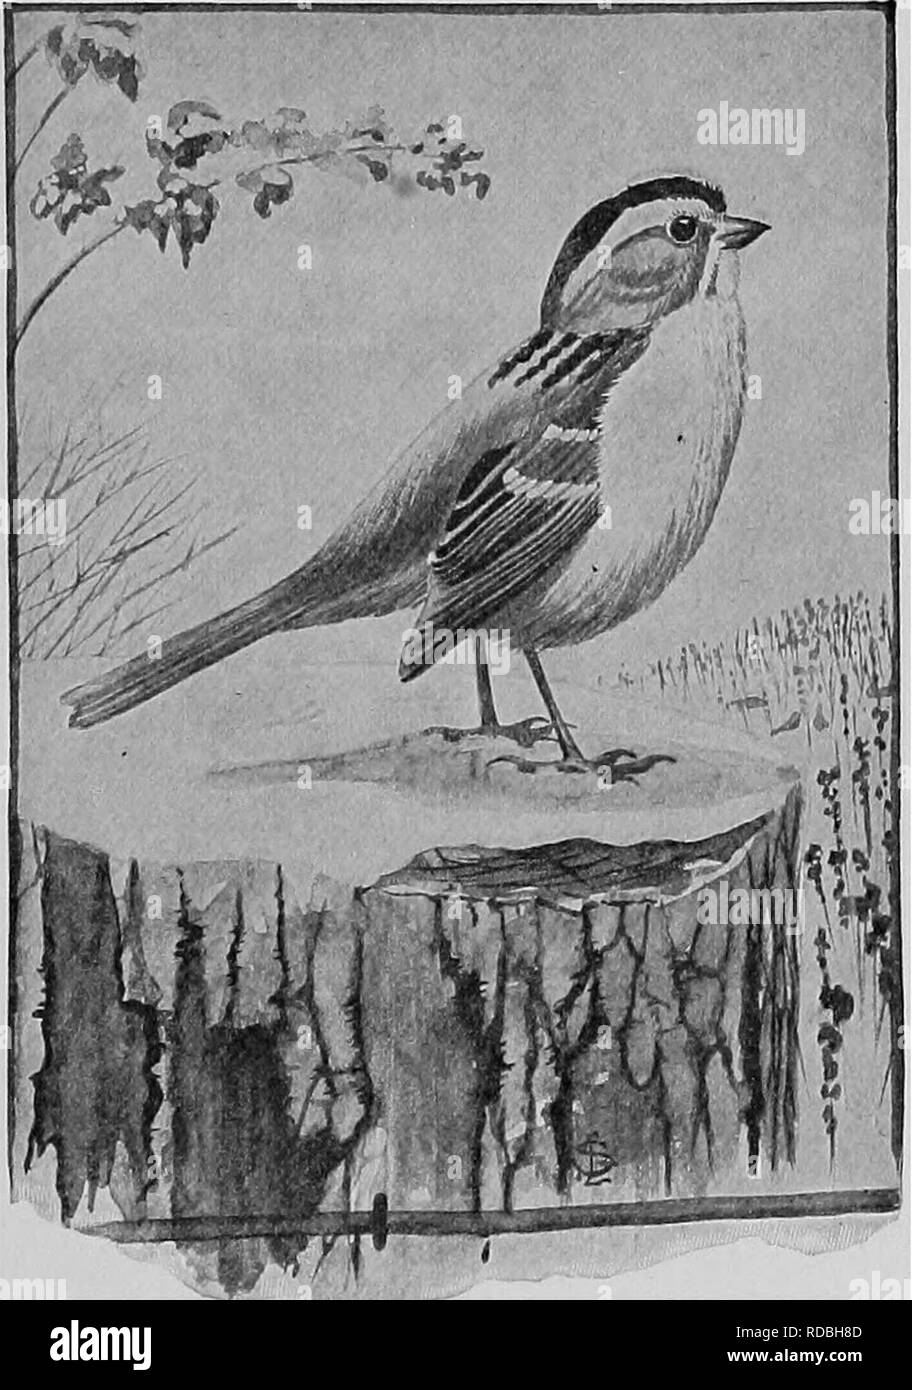 . The American natural history; a foundation of useful knowledge of the higher animals of North America. Natural history. A SPARROW THAT IS A PEST 305 Is pleasing, and nearly every self-respecting ornithologist trans- lates it into English to suit his or her fancy; but, to tell the truth, the White-Throat never will win a prize as a great singer.. WHITE-THROATED SPAEEOW. The English Sparrow.'—^Let me dip my pen in blue vitriol; for my temperature rises at the thought of writing the name. Daily we see the unclean little wretches grubbing in the filth and microbes of the street, where no America Stock Photo